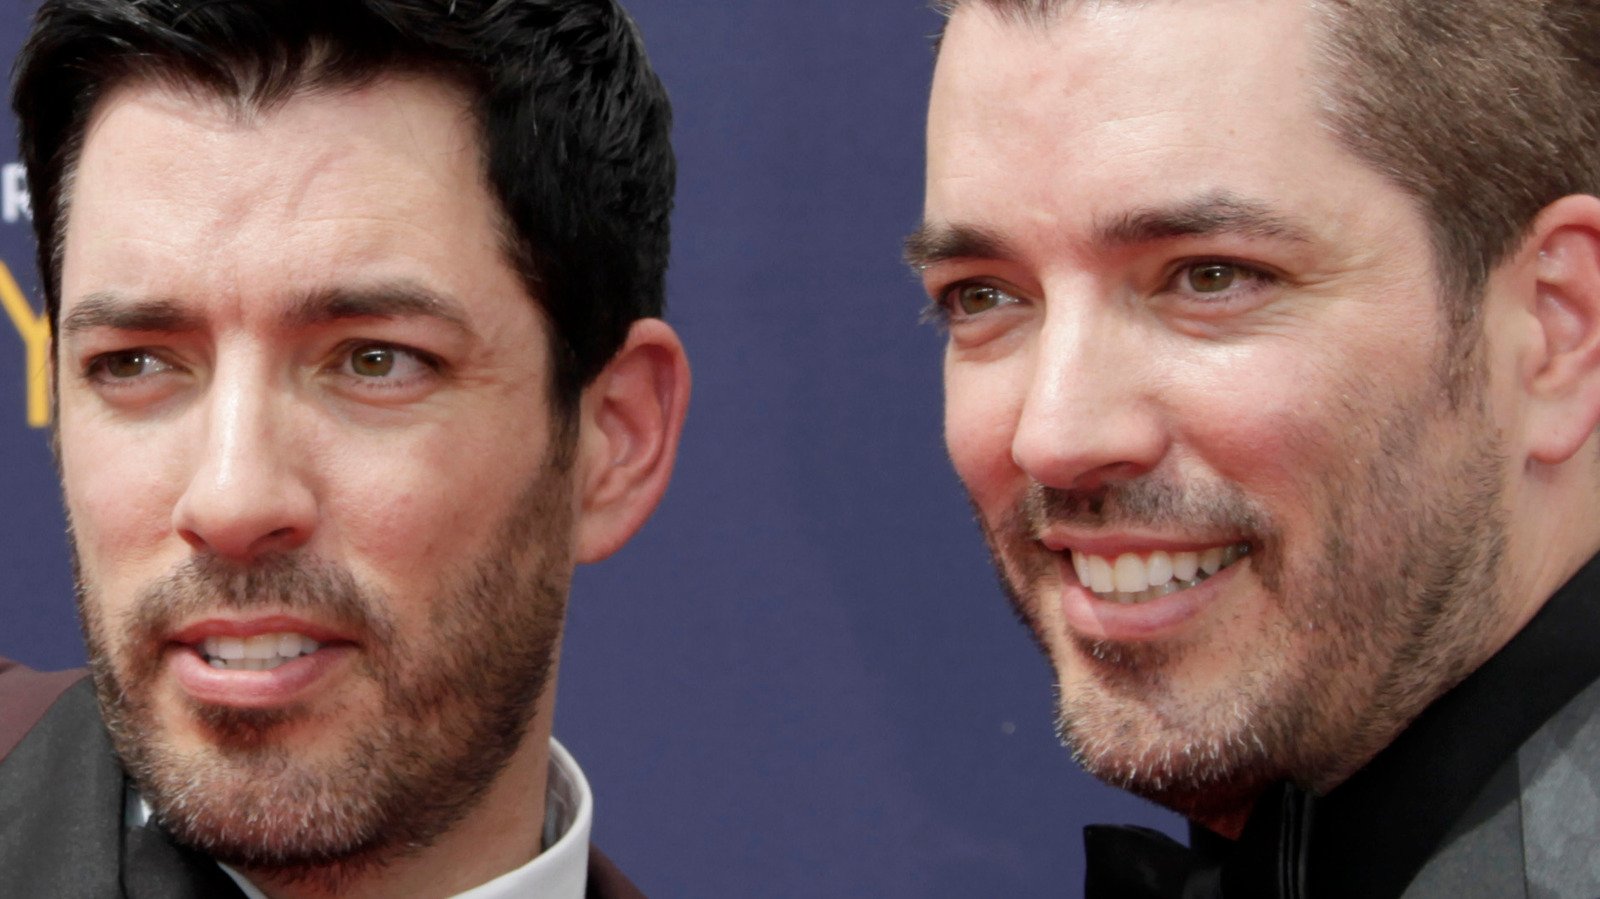 Bad Home Advice Dished Out On Property Brothers